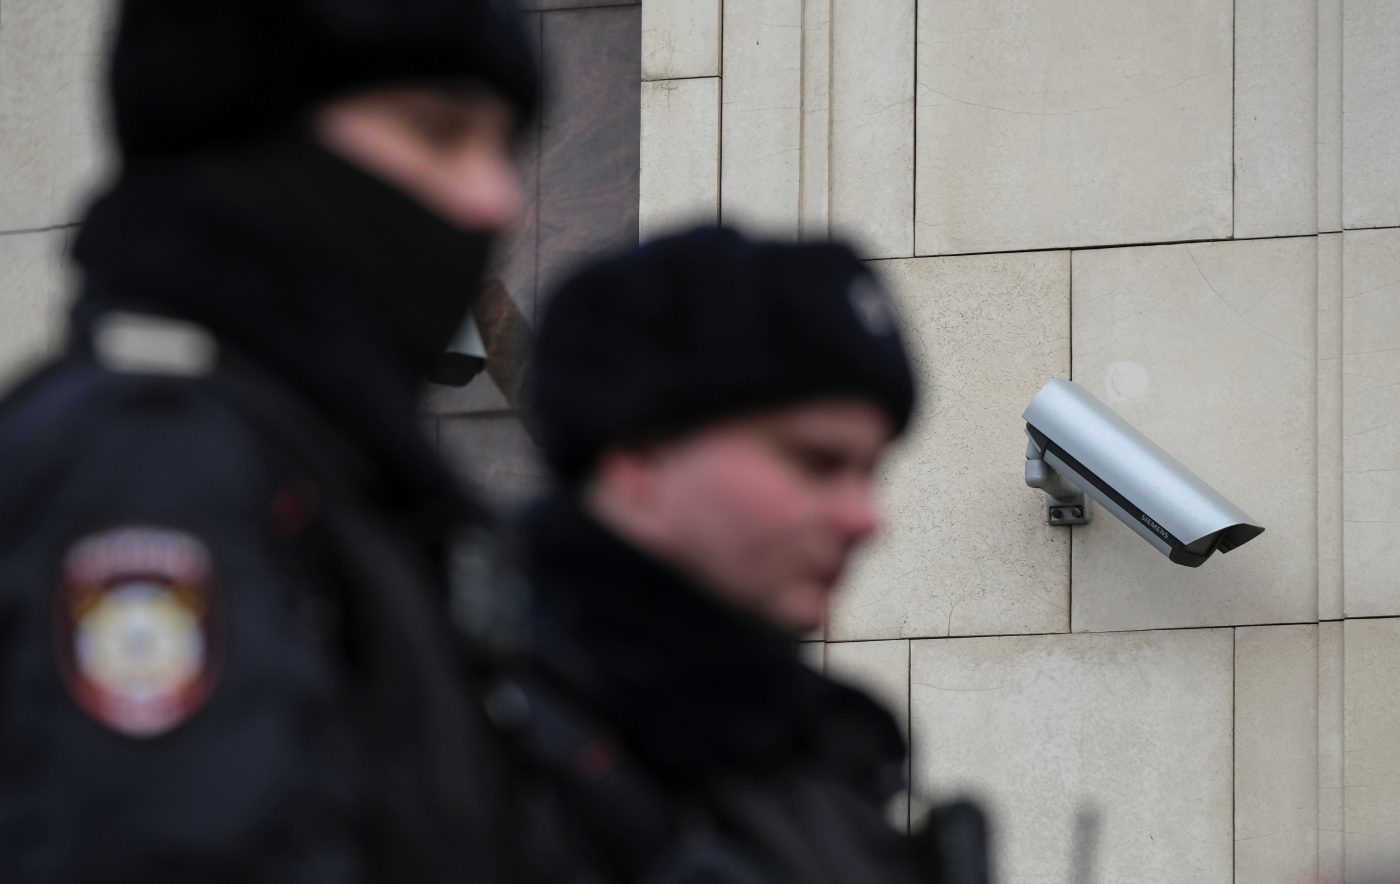 Photo: Police officers walk past a surveillance camera in central Moscow, Russia January 26, 2020. Picture taken January 26, 2020. Credit: REUTERS/Shamil Zhumatov